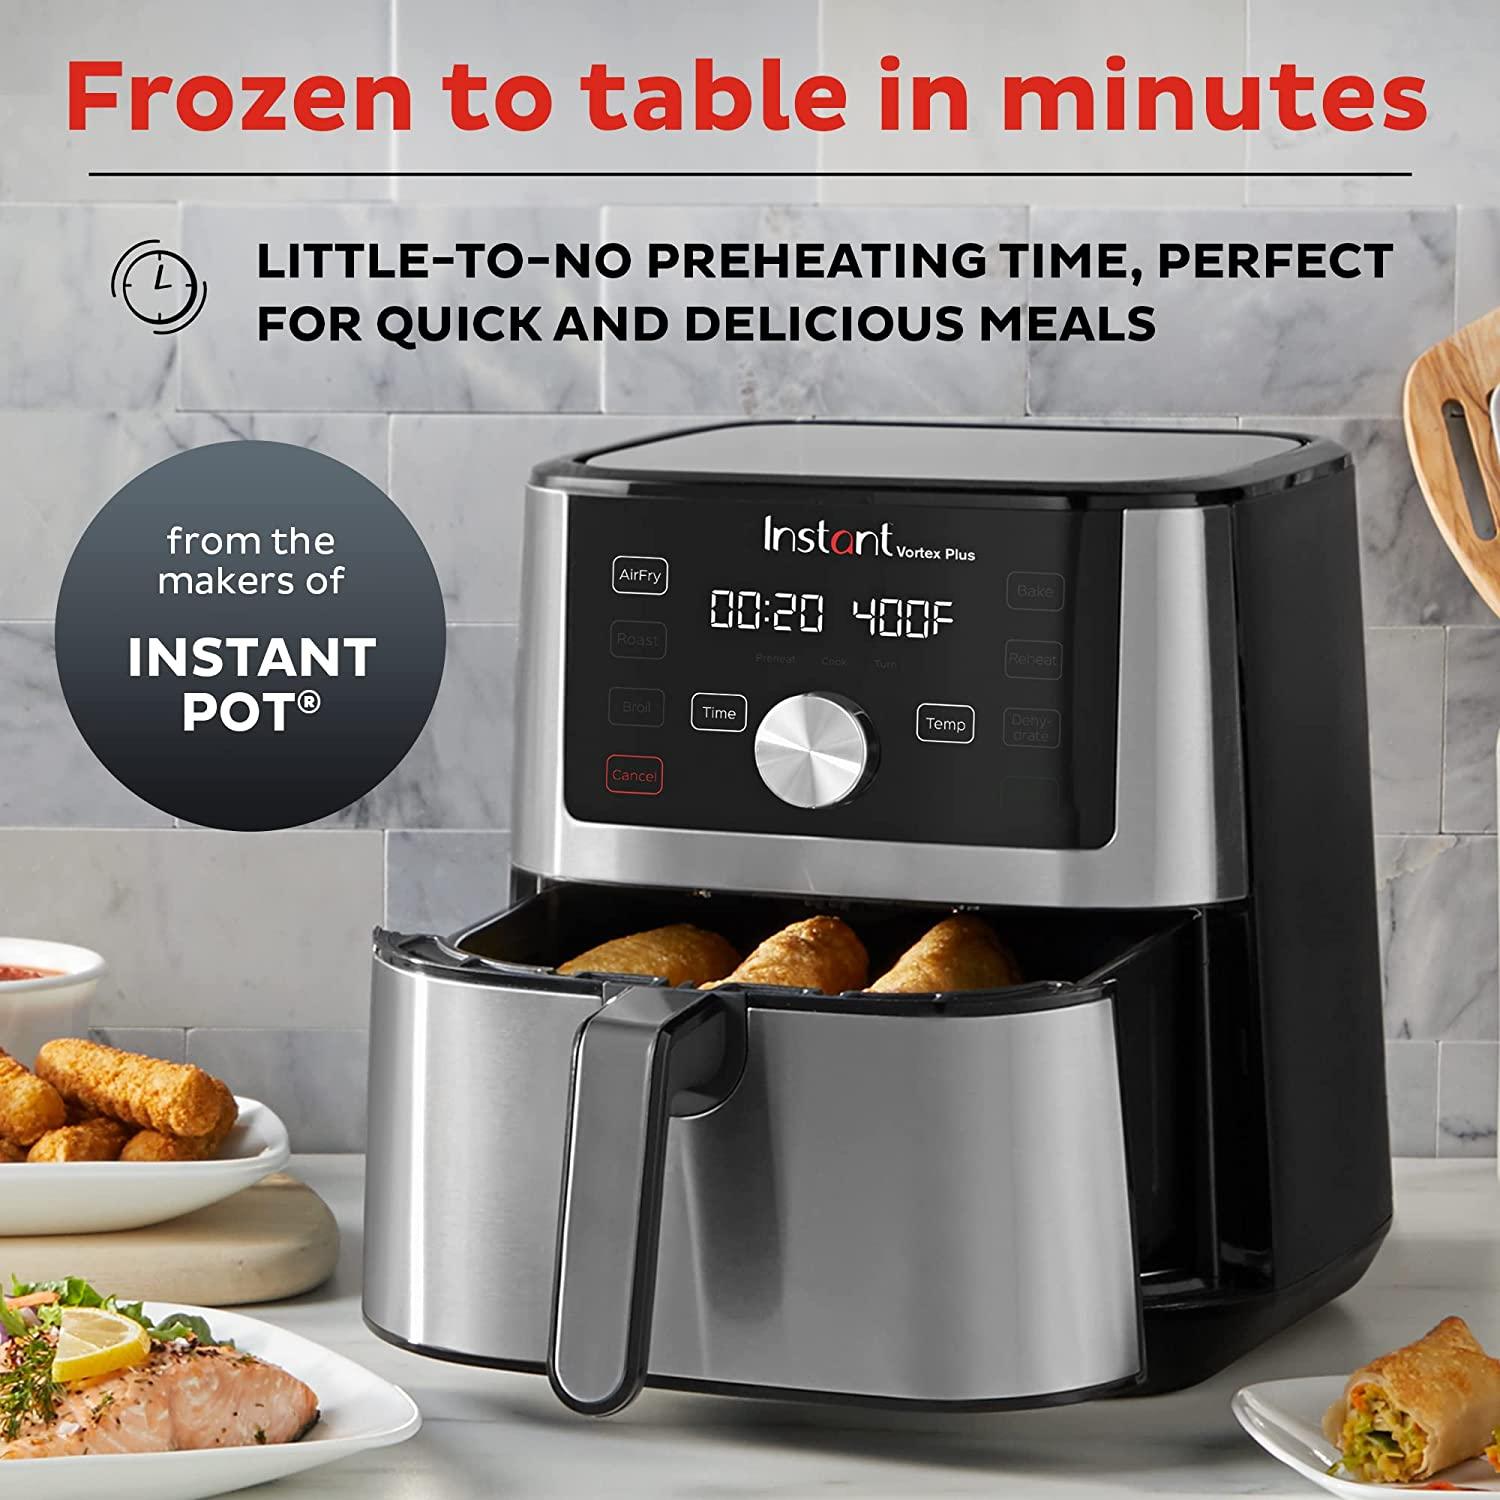 Instant Vortex Plus Air Fryer Oven, 6 Quart, From the Makers of Instant  Pot, 6-in-1, Broil, Roast, Dehydrate, Bake, Non-stick and Dishwasher-Safe  Basket, App With Over 100 Recipes, Stainless Steel 6 QT